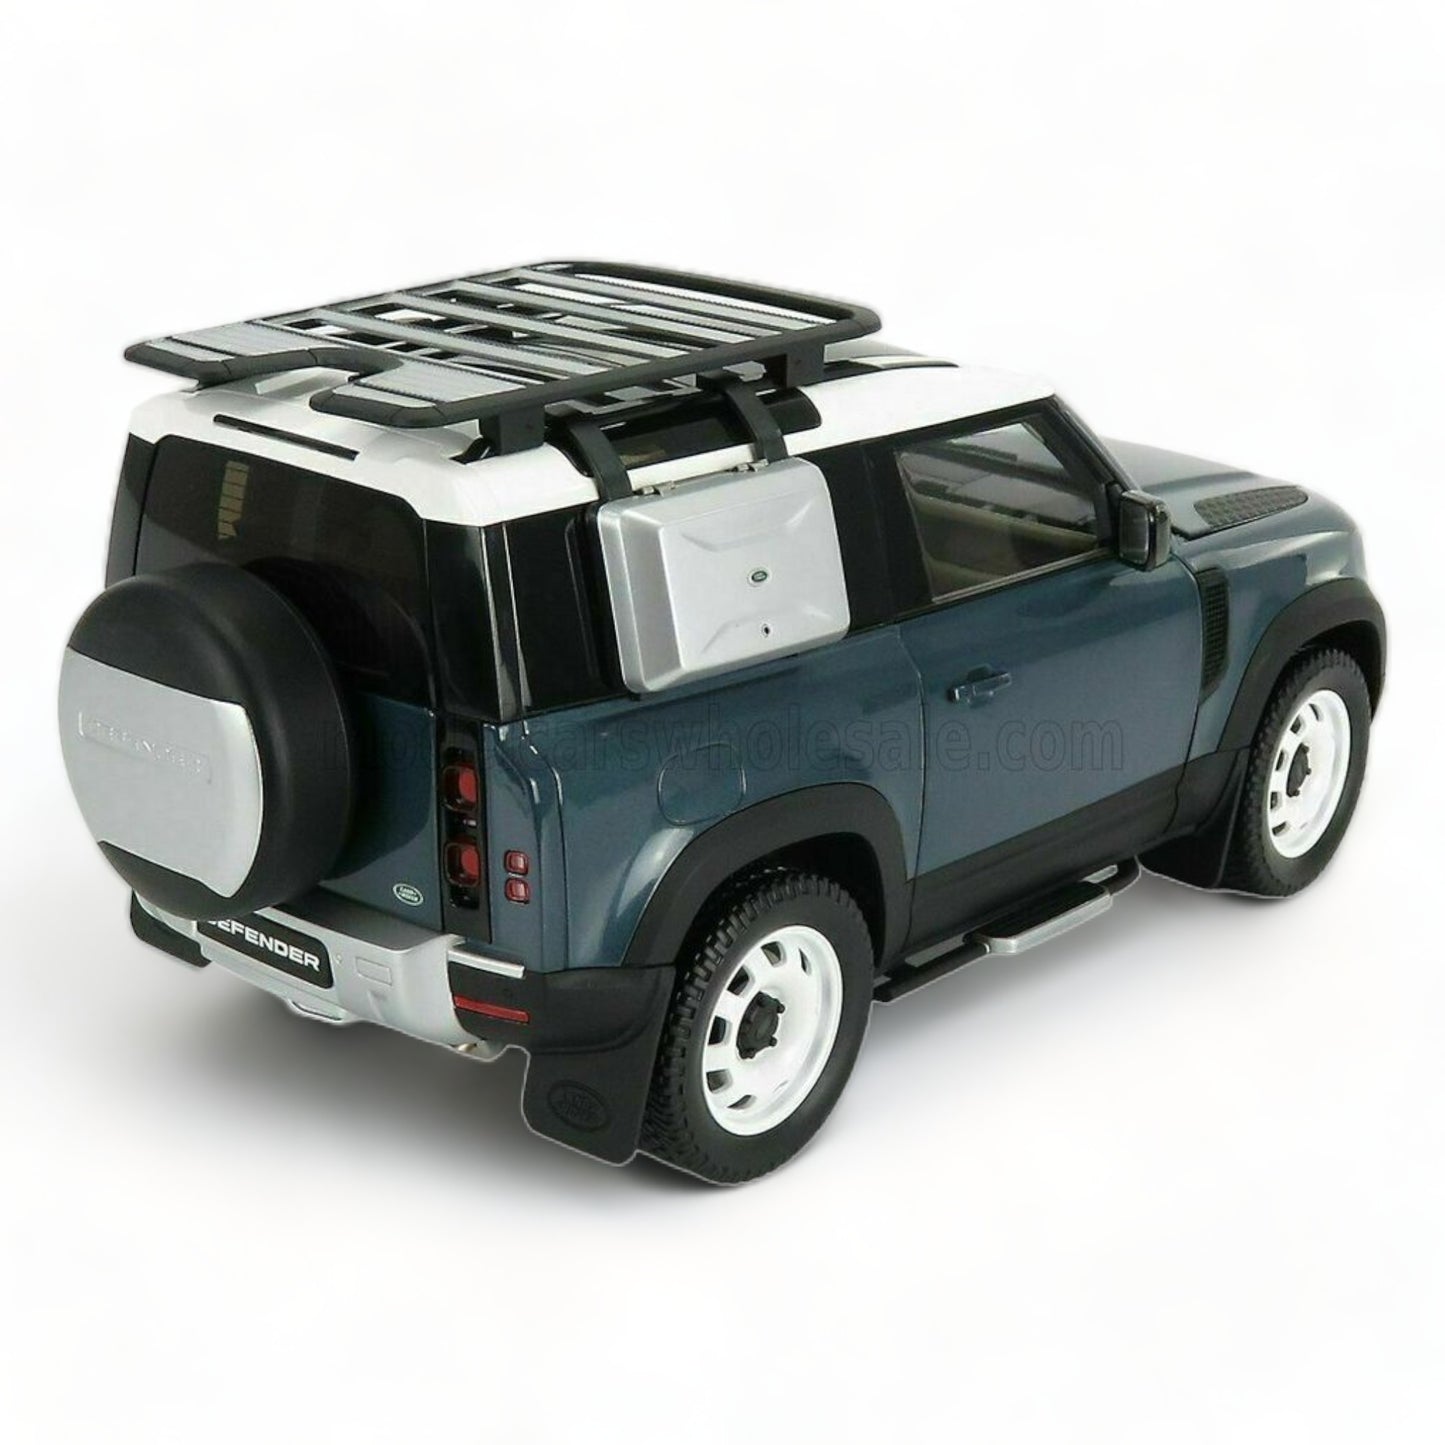 1/18 Diecast  Land Rover Defender 90 Blue by Almost Real Scale Model Car|Sold in Dturman.com Dubai UAE.